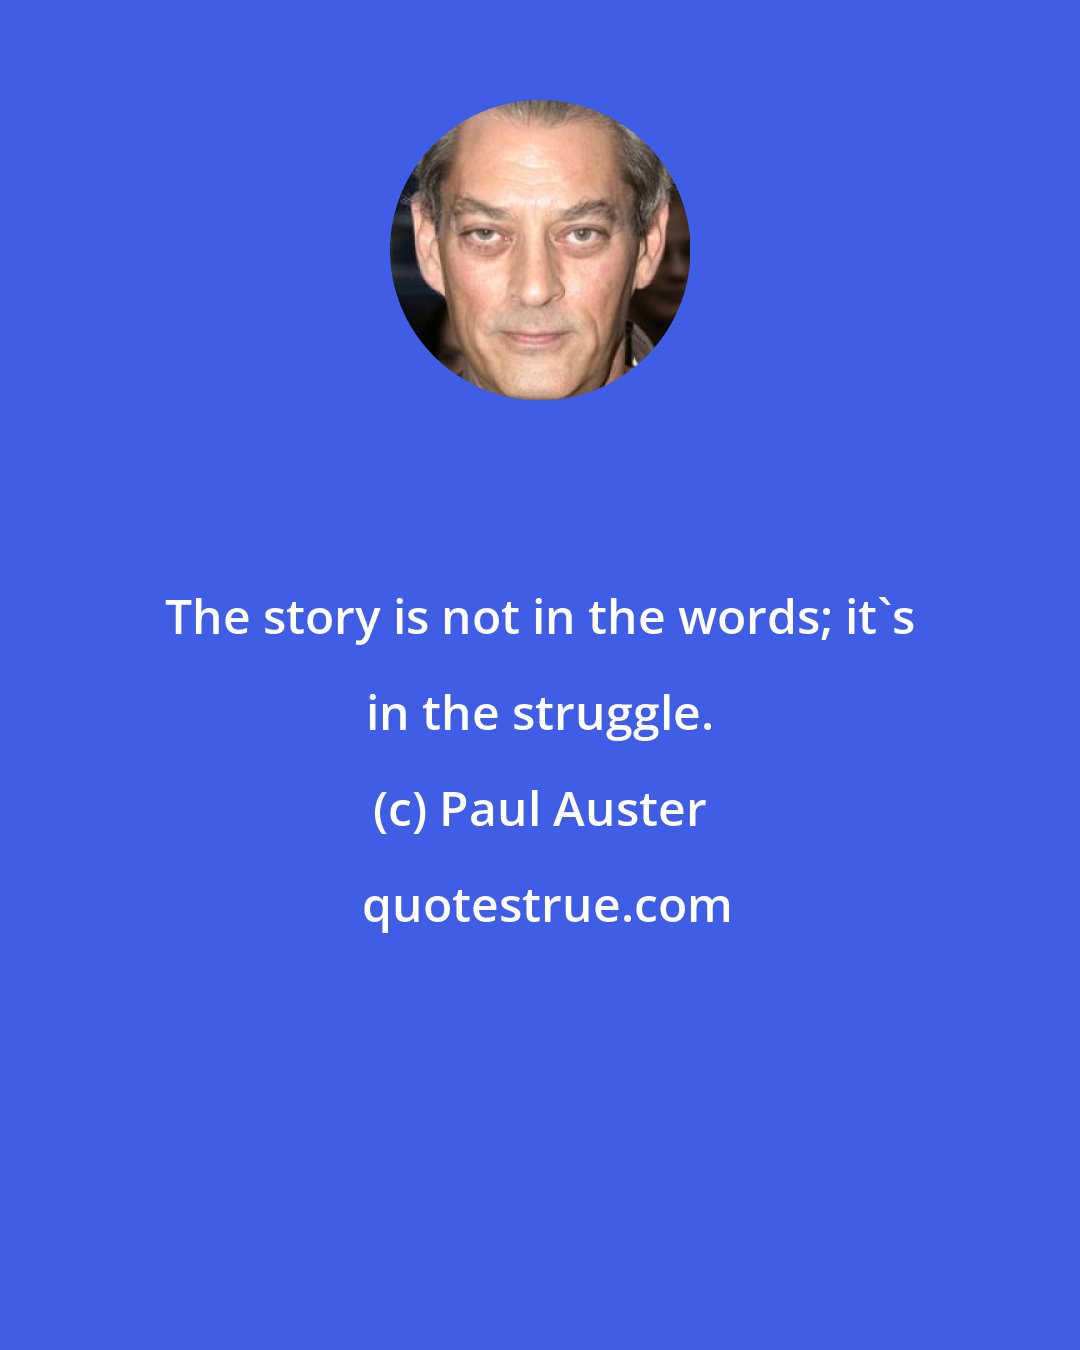 Paul Auster: The story is not in the words; it's in the struggle.